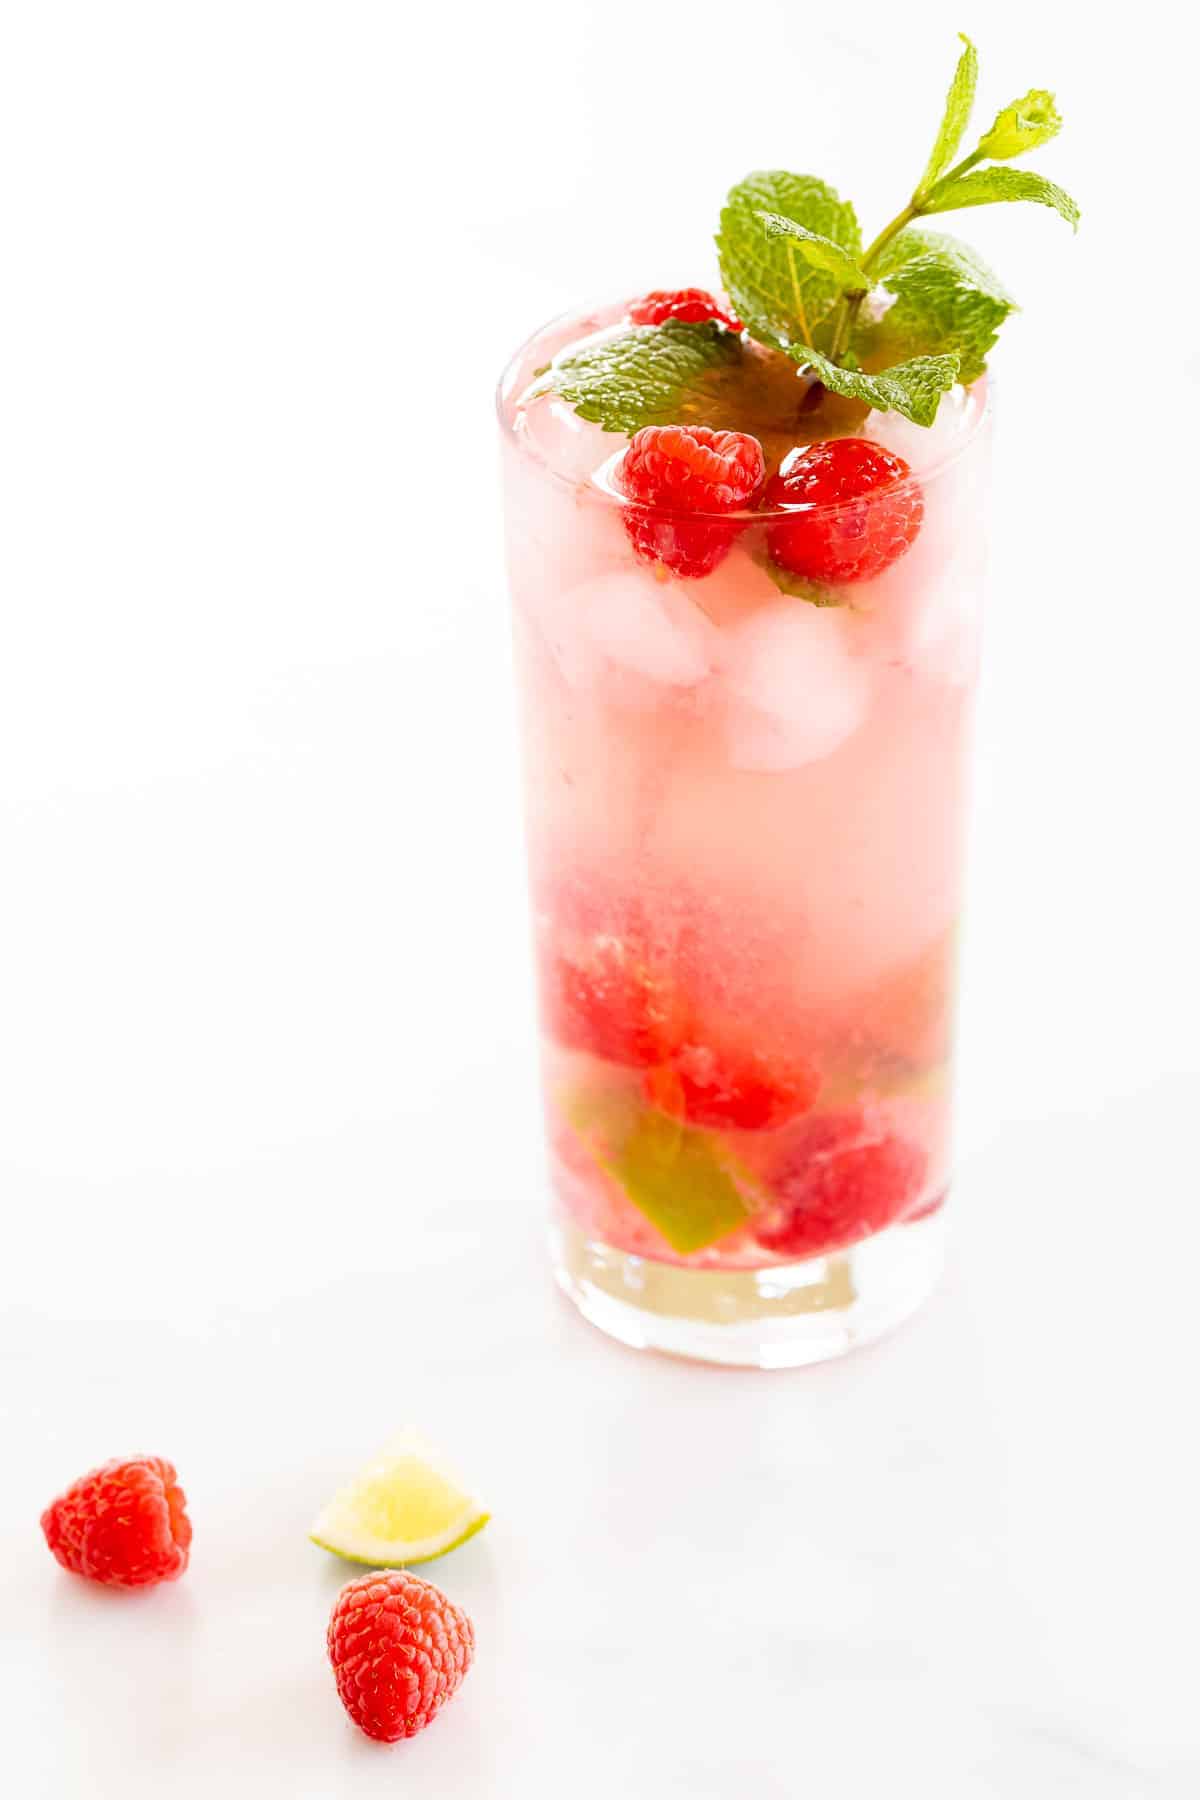 raspberry mojito with limes and mint sprig